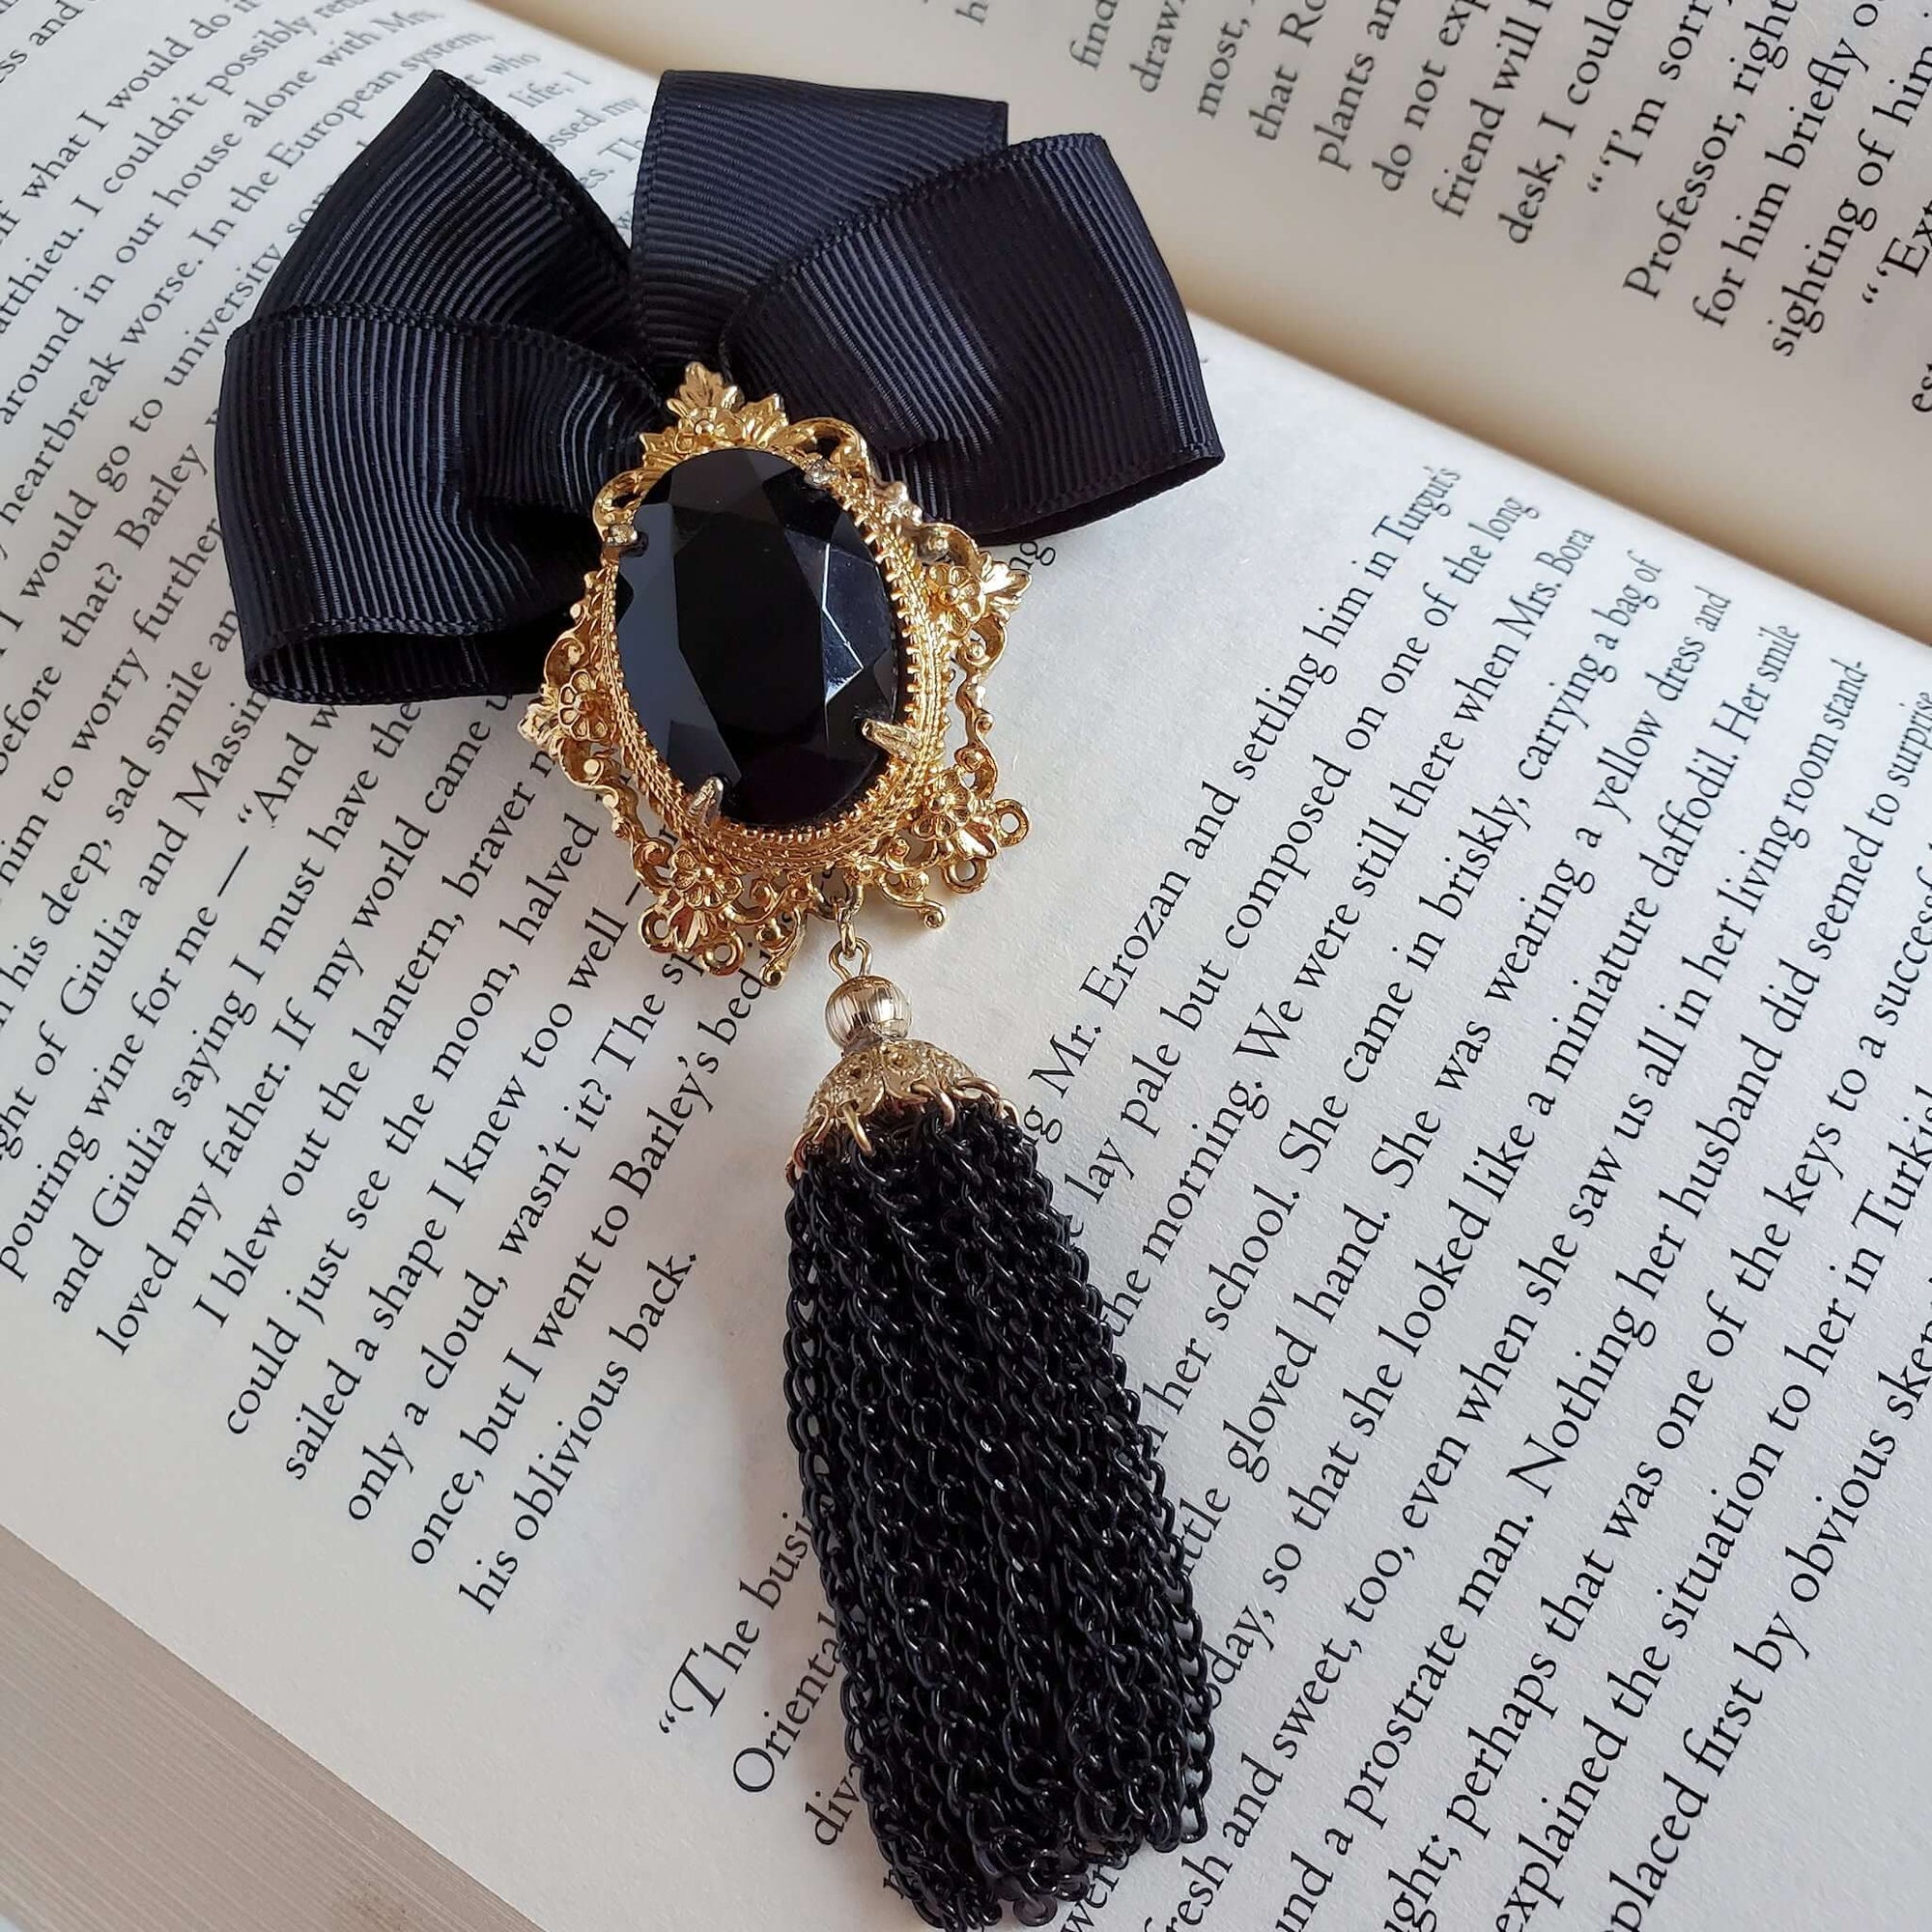 Black ribbon bow brooch with a black stone in a gold setting , and finished with a black tassel